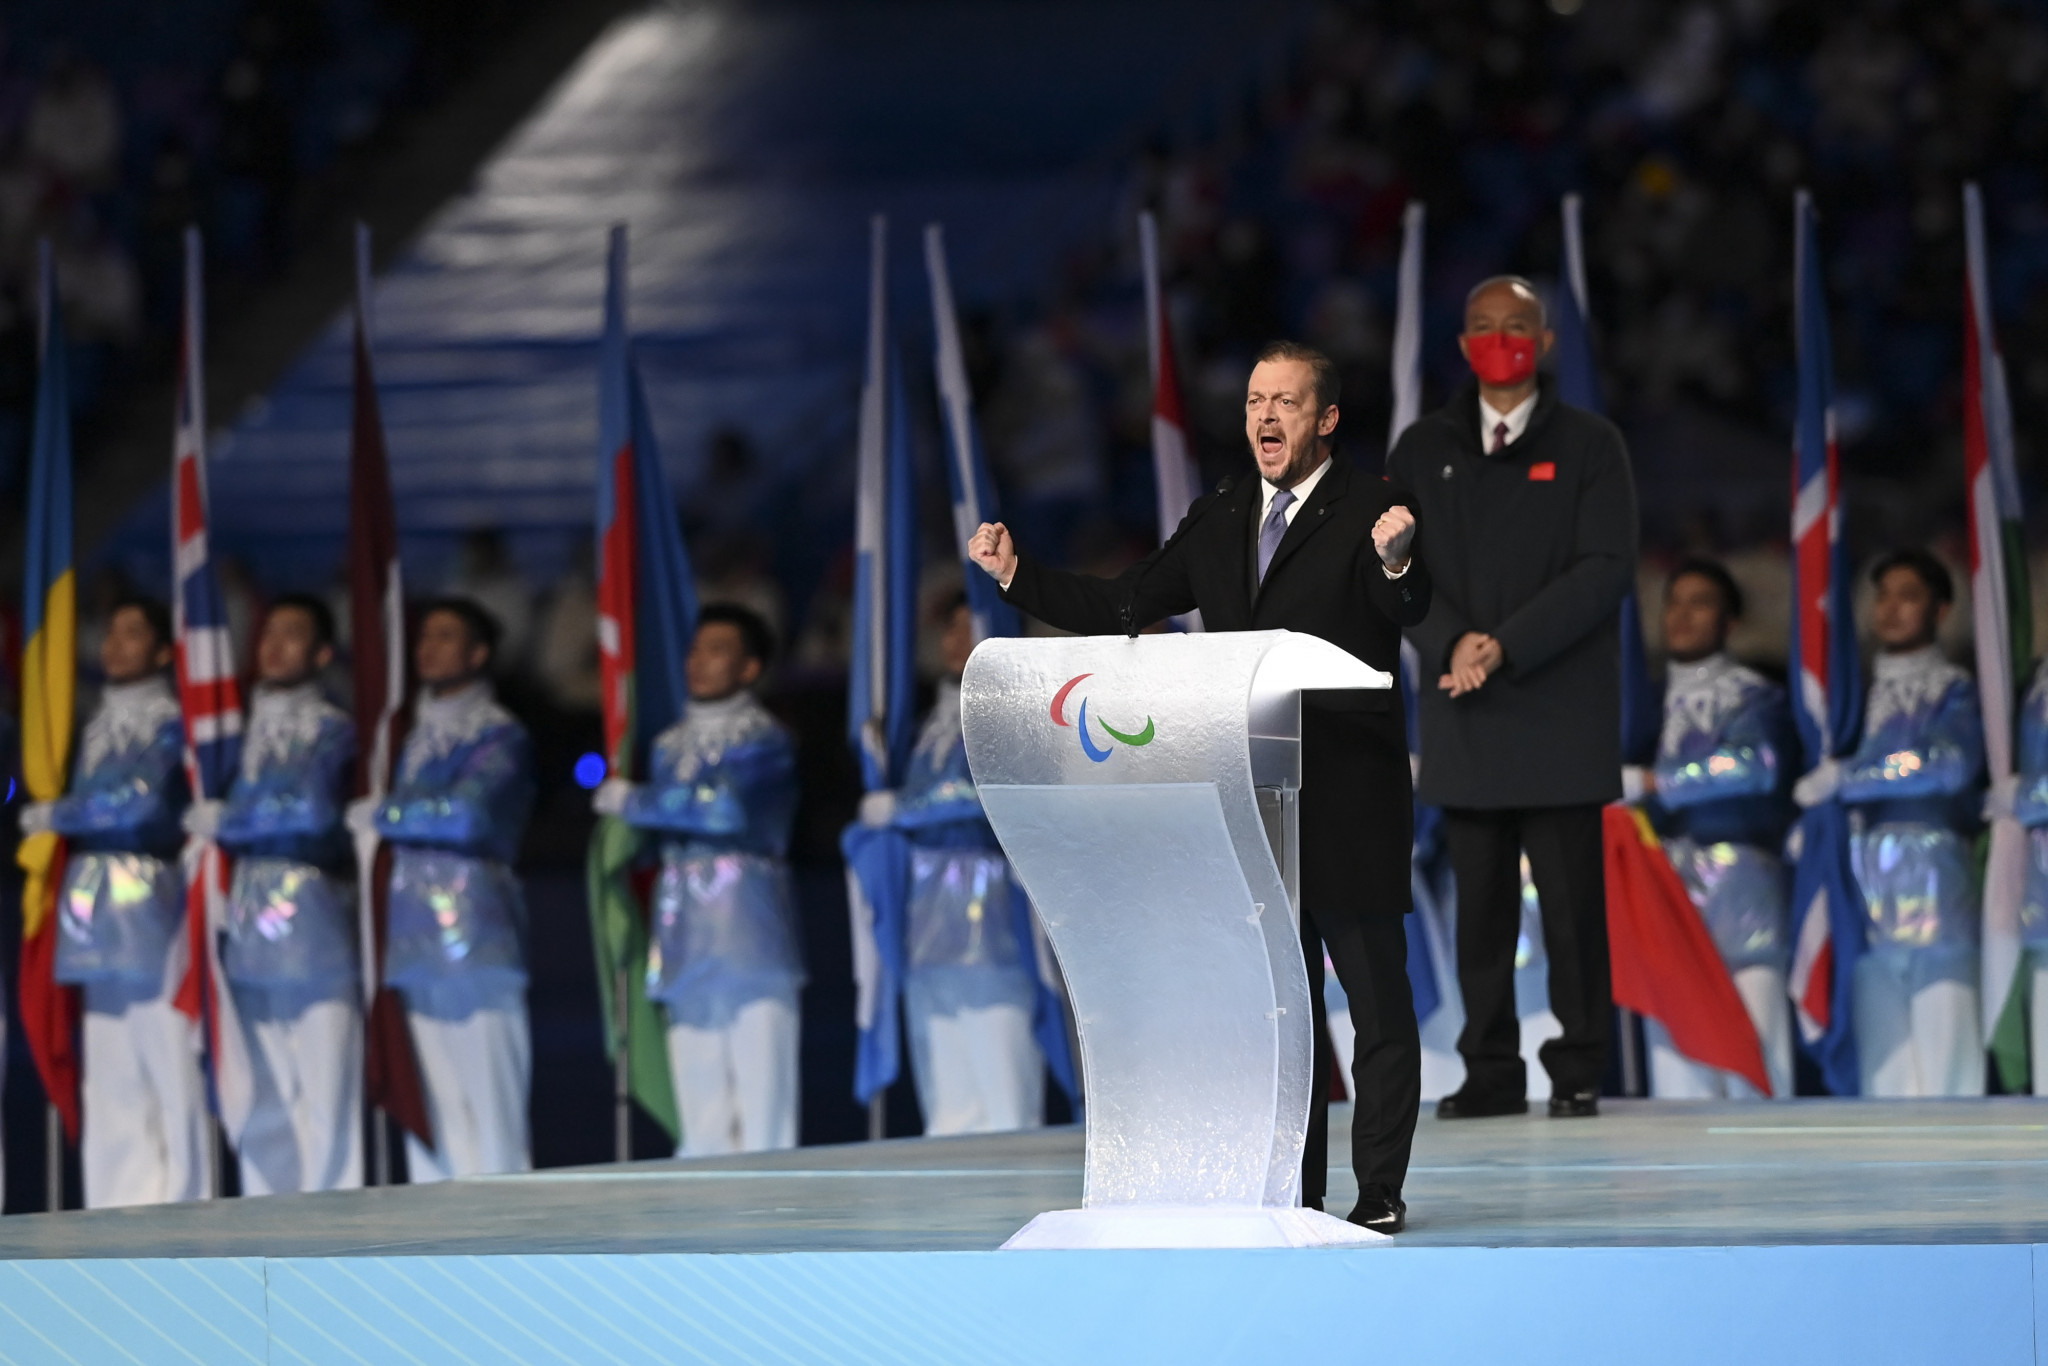 IPC President Andrew Parsons gave an impassioned speech at the Opening Ceremony of the Winter Paralympics following Russia's invasion of Ukraine ©Getty Images